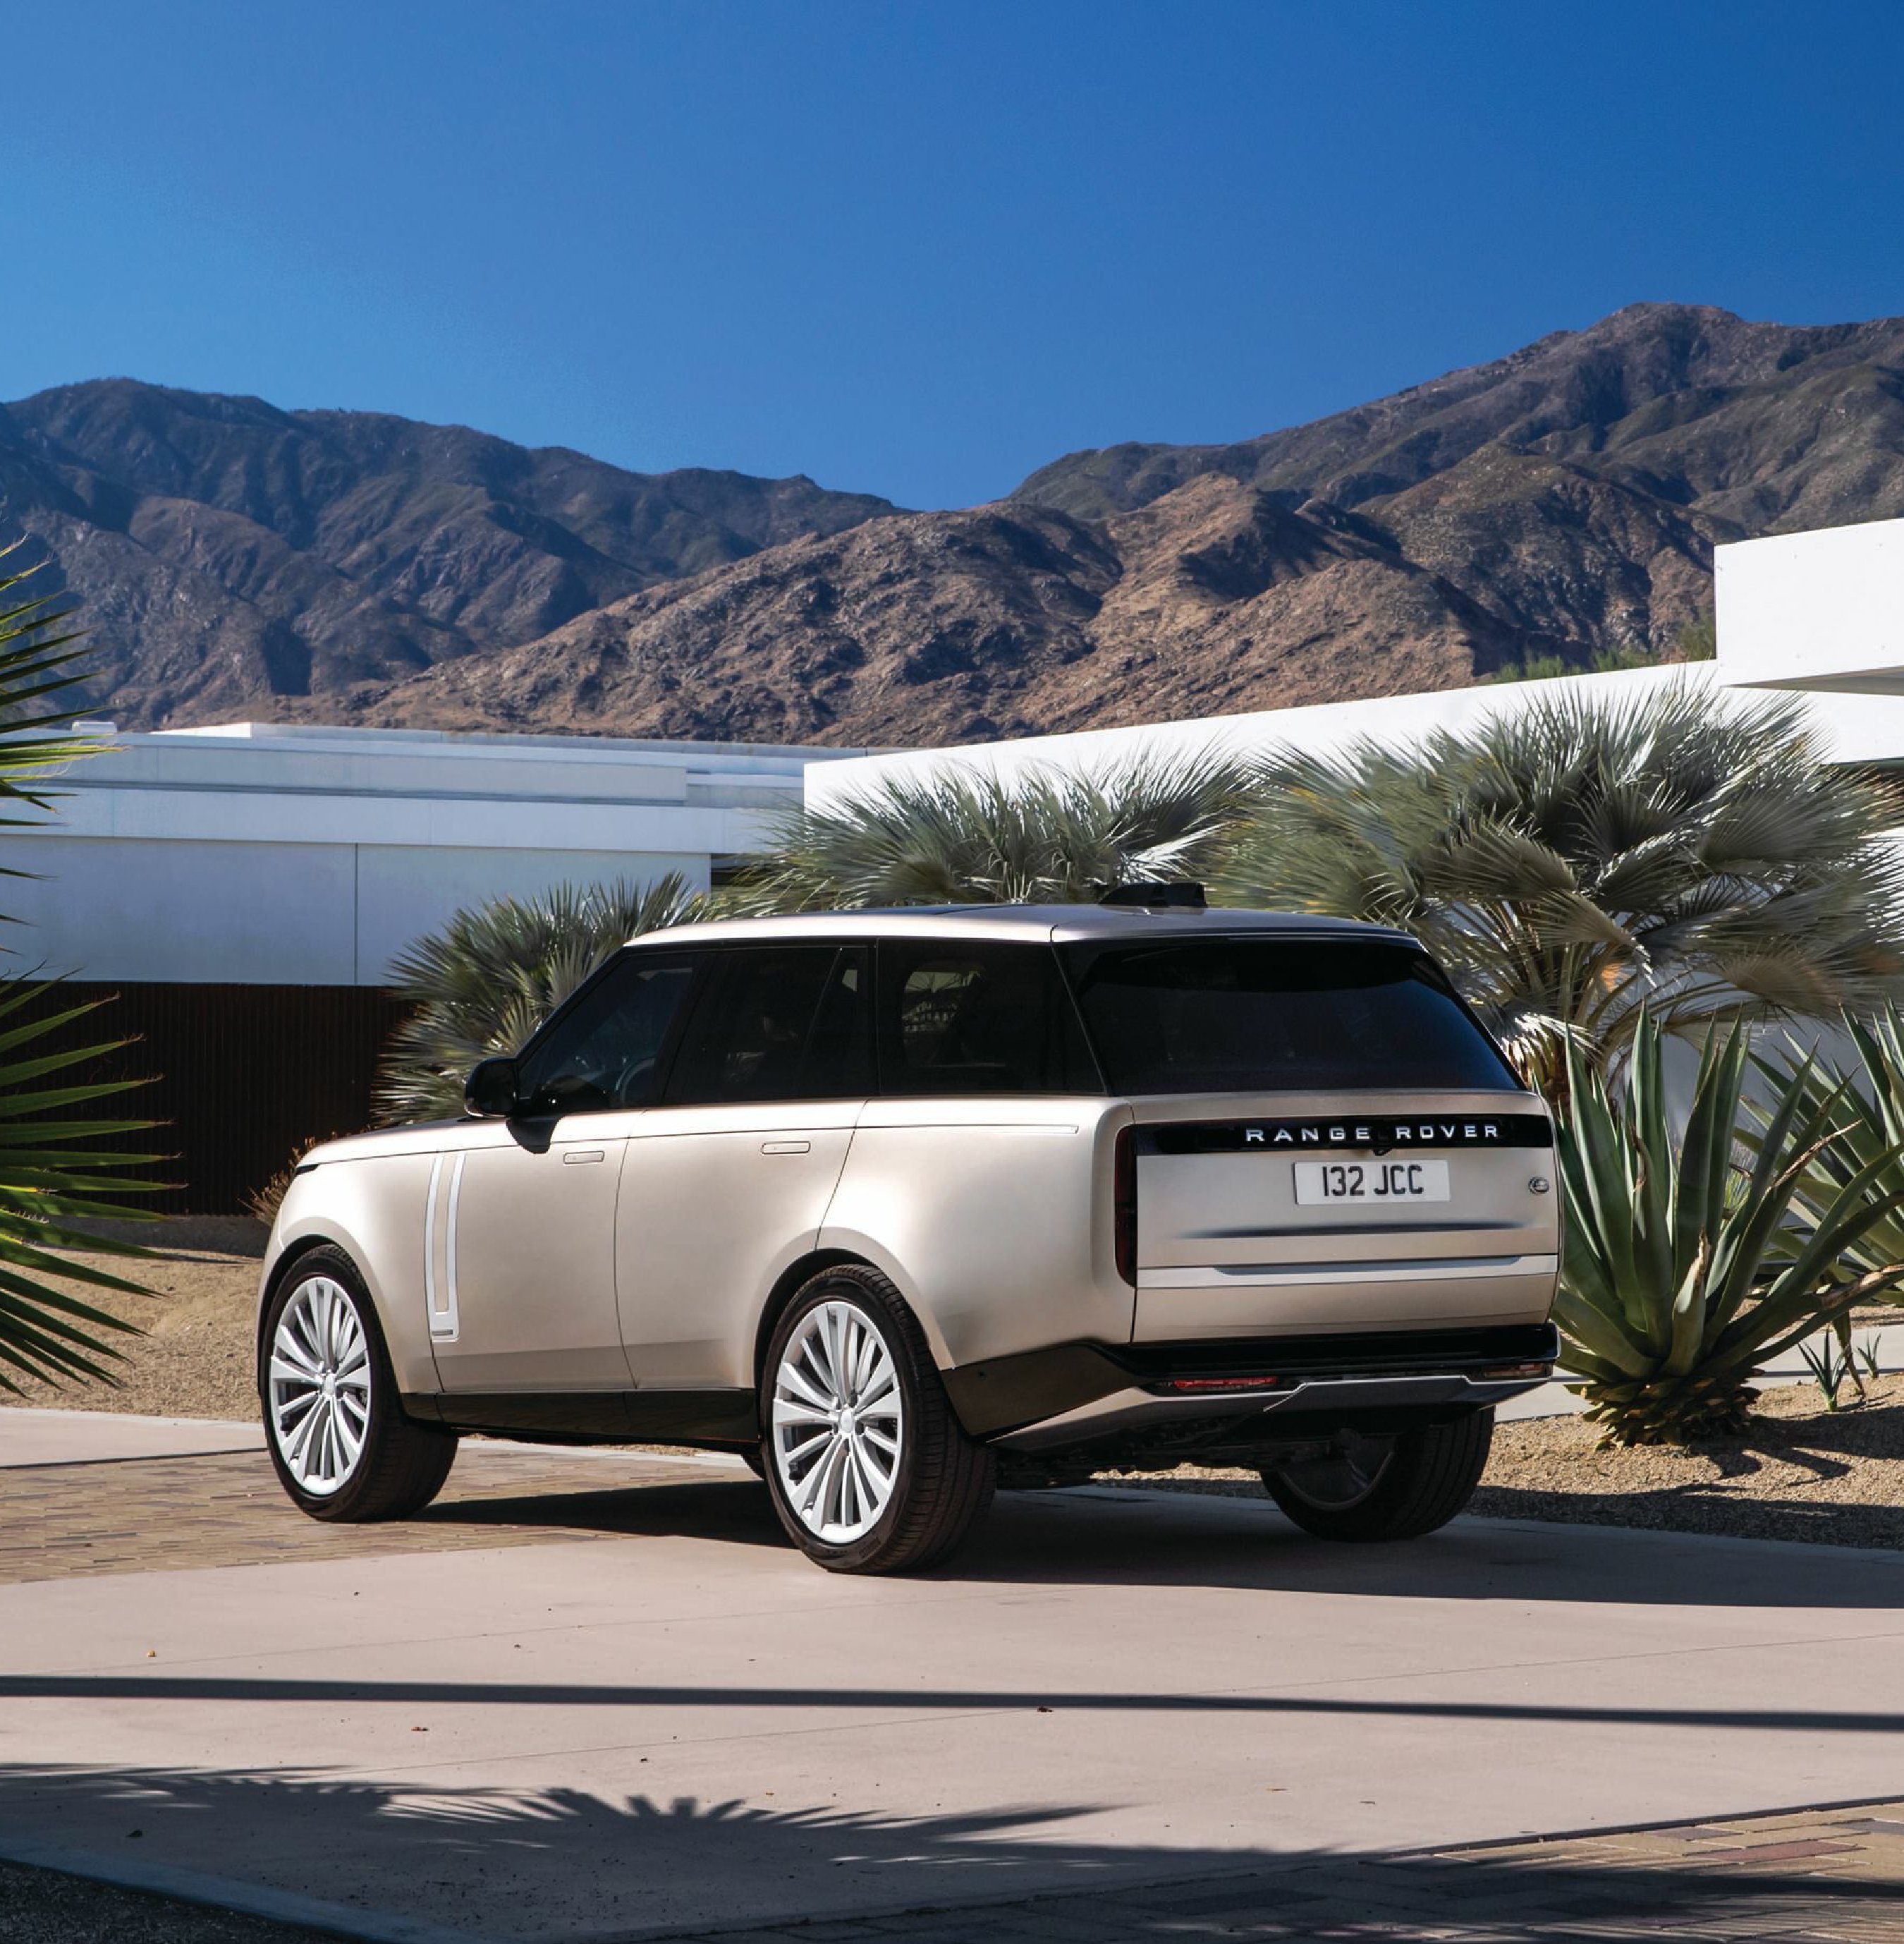 Short front overhangs, an upright windscreen and its distinctive boat tail rear are key elements of the Range Rover’s signature proportions. PHOTO COURTESY OF BRAND